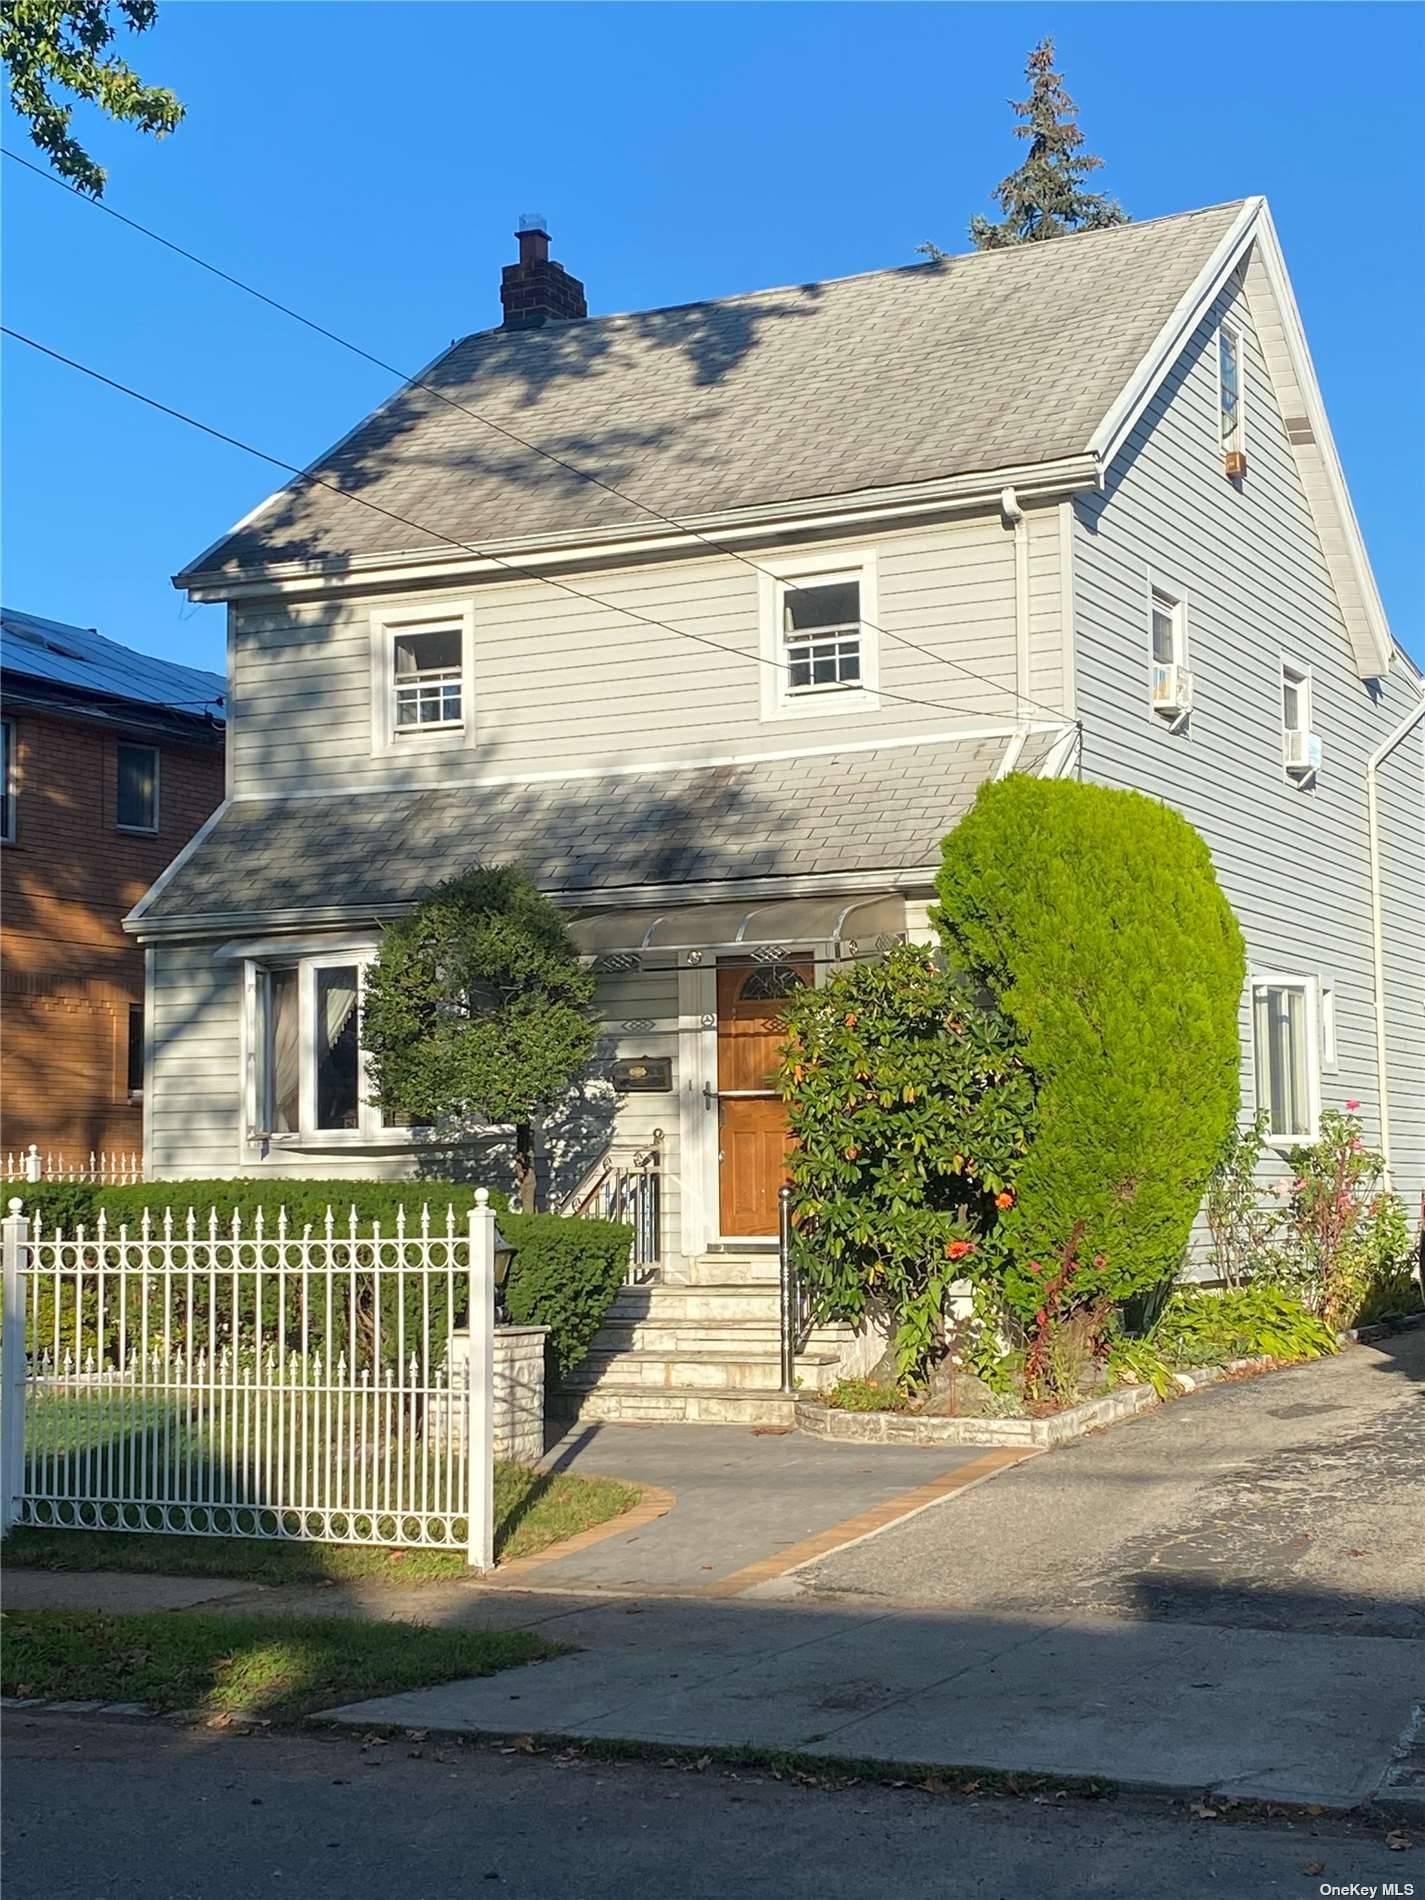 Excellent Location Of Detached, Dwelling Colonial On A R3 2 Zoning Street Of Fresh Meadows, Beautiful Garden Design In The Backyard And Well Maintained, Landscape, Convenient To All.